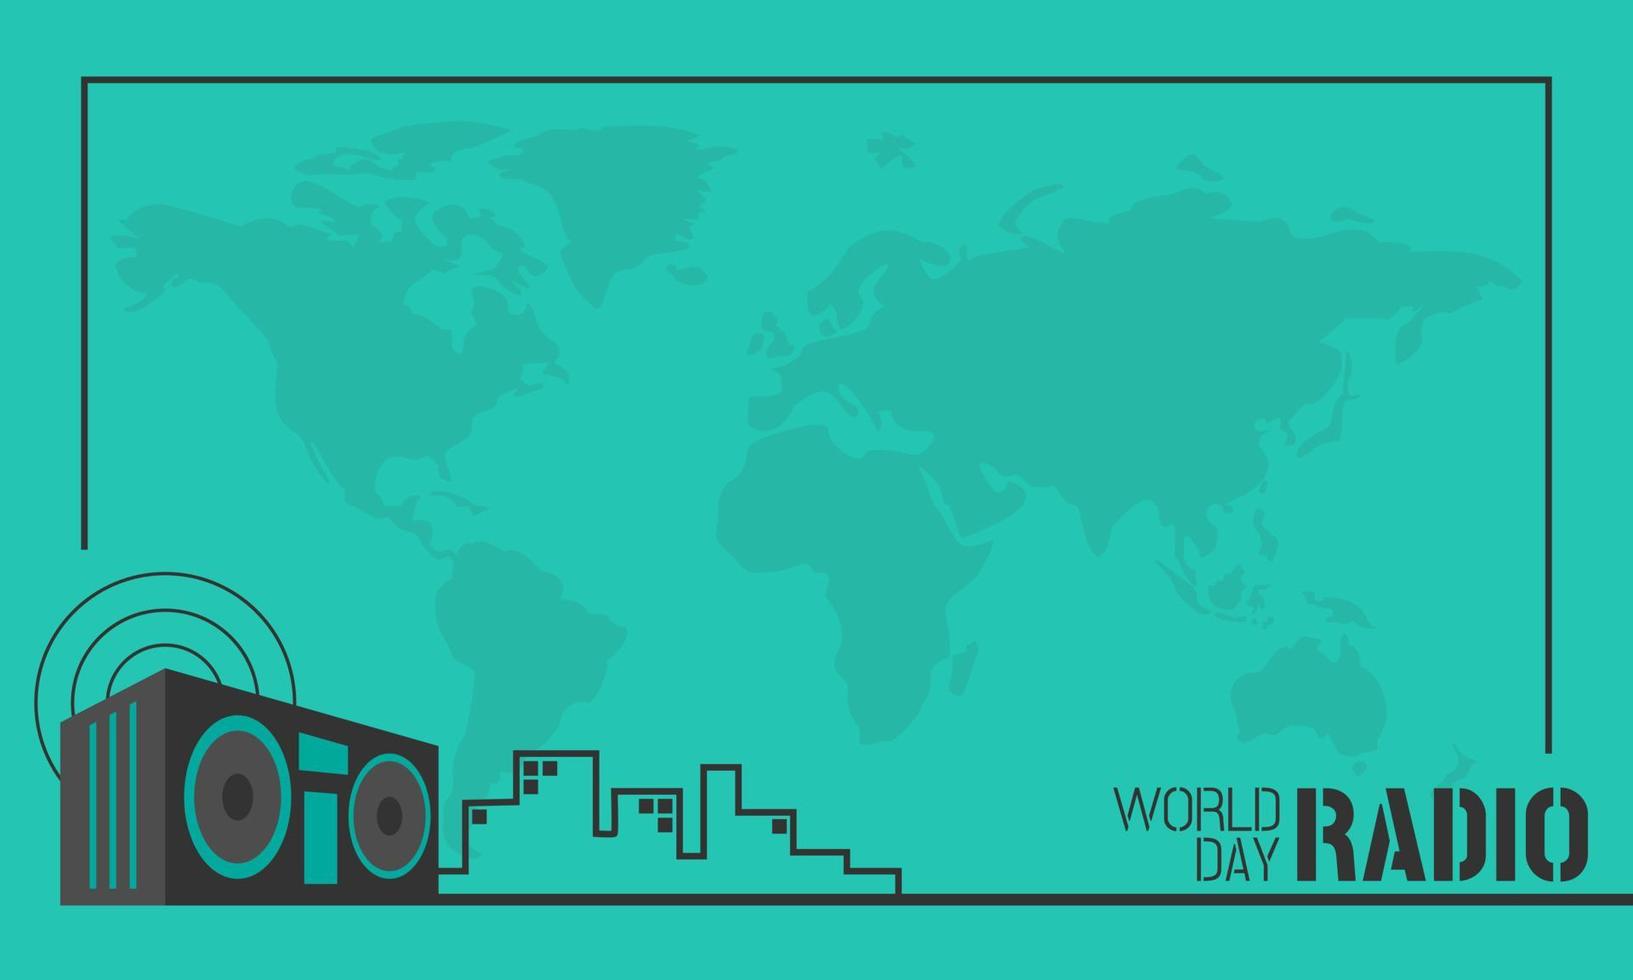 World radio day background with copy space area vector